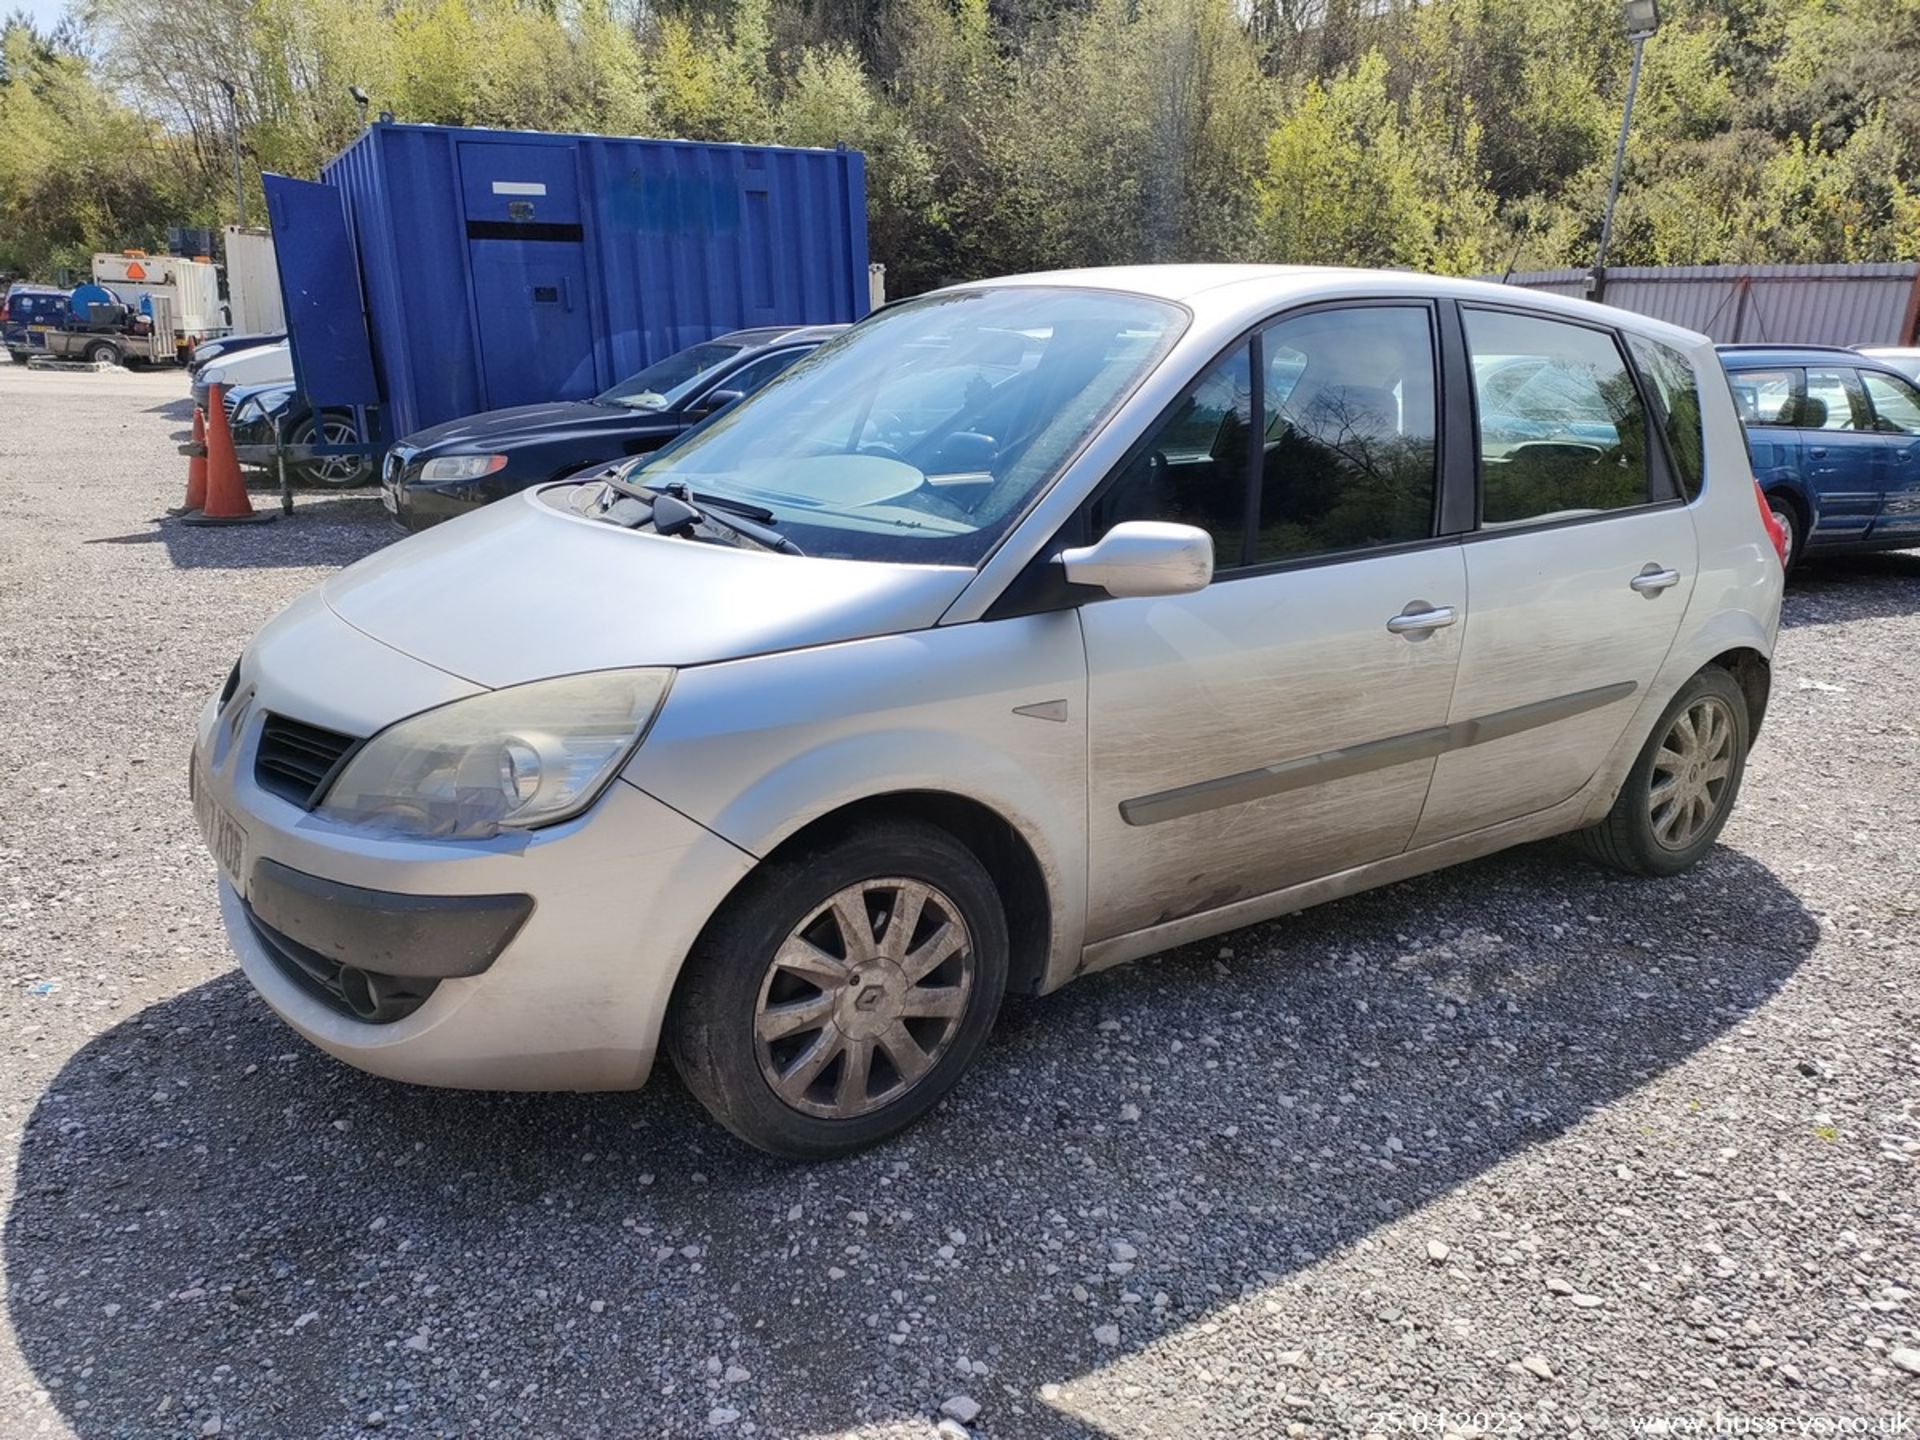 07/07 RENAULT SCENIC DYN VVT - 1598cc 5dr MPV (Silver) - Image 13 of 34